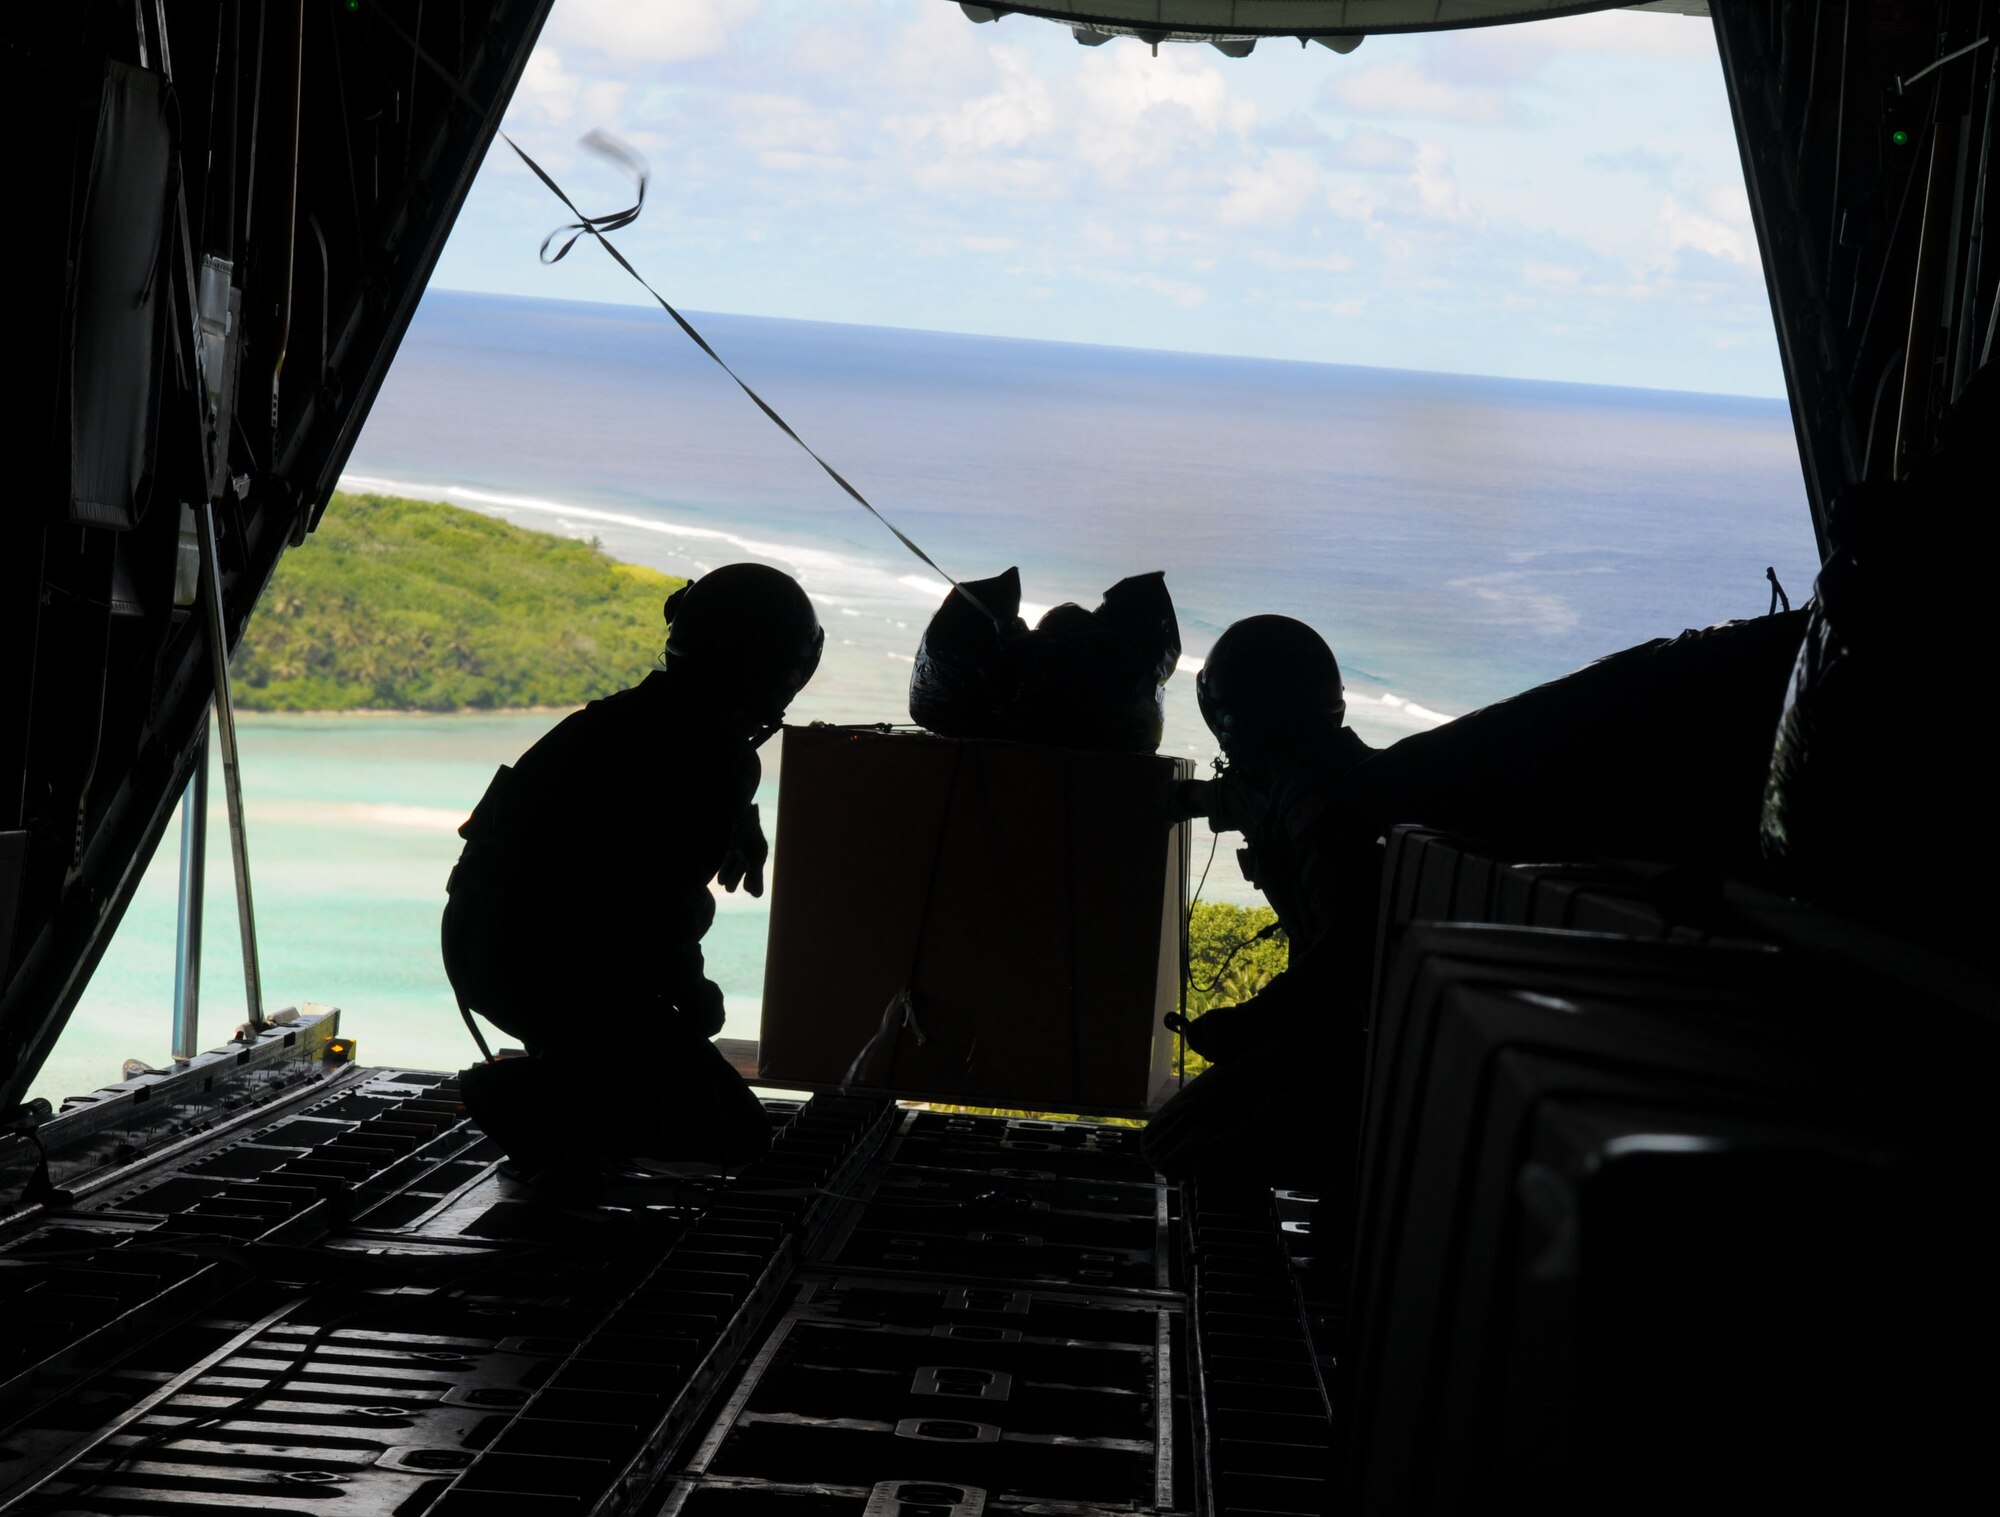 Airmen from the 36th Airlift Squadron, Yokota Air Base, Japan, lookout upon the Islands of Micronesia during Operation Christmas Drop, Dec. 14. Operation Christmas Drop is the Air Force?s longest-running humanitarian which began in 1952. Airmen today continue the tradition delivering supplies to remote islands of the Commonwealth of the Northern Marianas Islands, Yap, Palau, Chuuk and Pohnpei. (U.S. Air Force photo/ Senior Airman Nichelle Anderson)